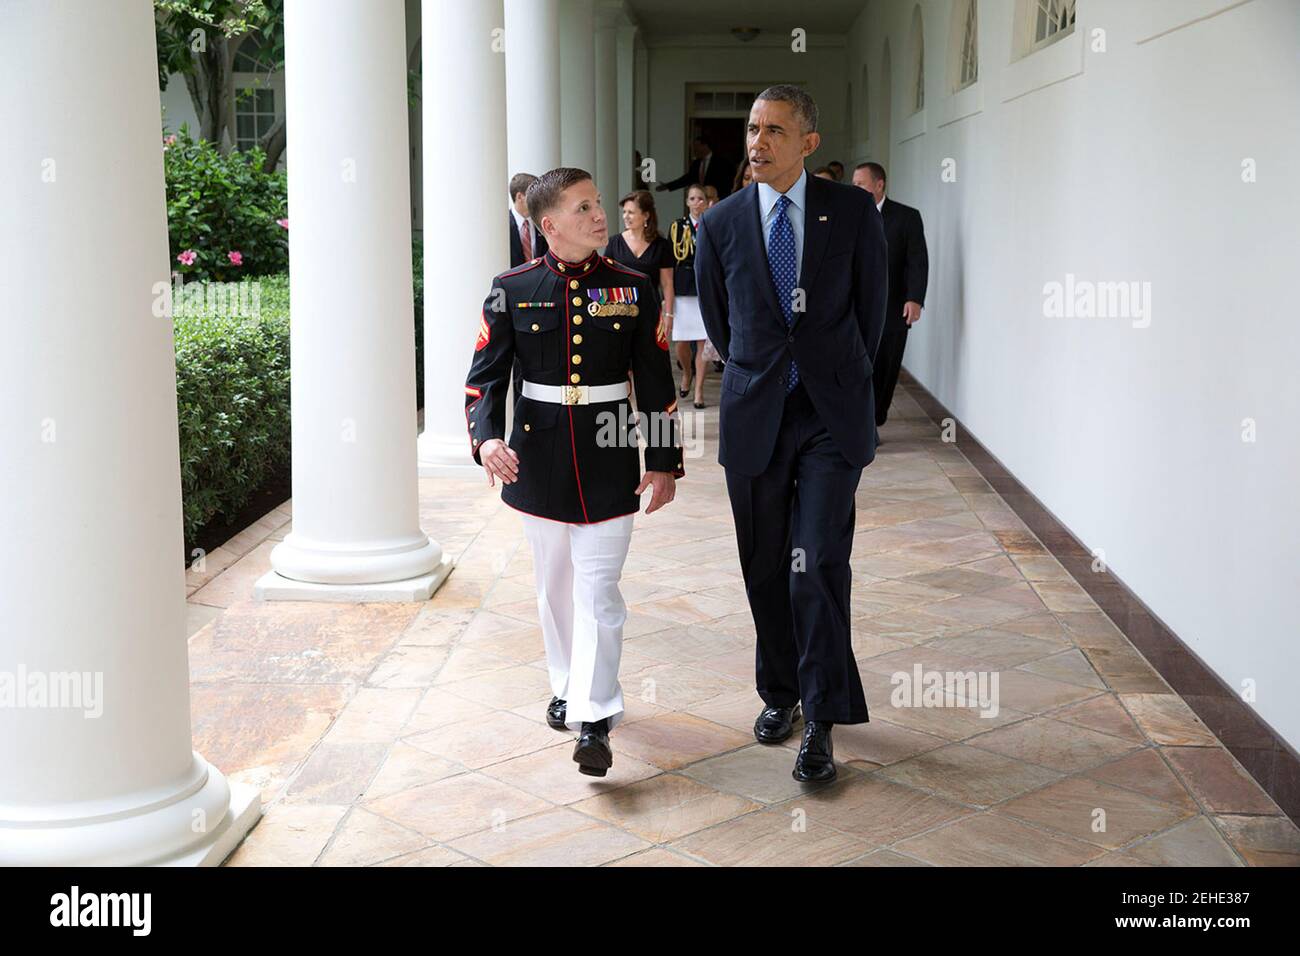 President Barack Obama walks on the Colonnade with Corporal William 'Kyle' Carpenter, U.S. Marine Corps (Ret.) en route to a Medal of Honor ceremony in the East Room of the White House, June 19, 2014. Stock Photo